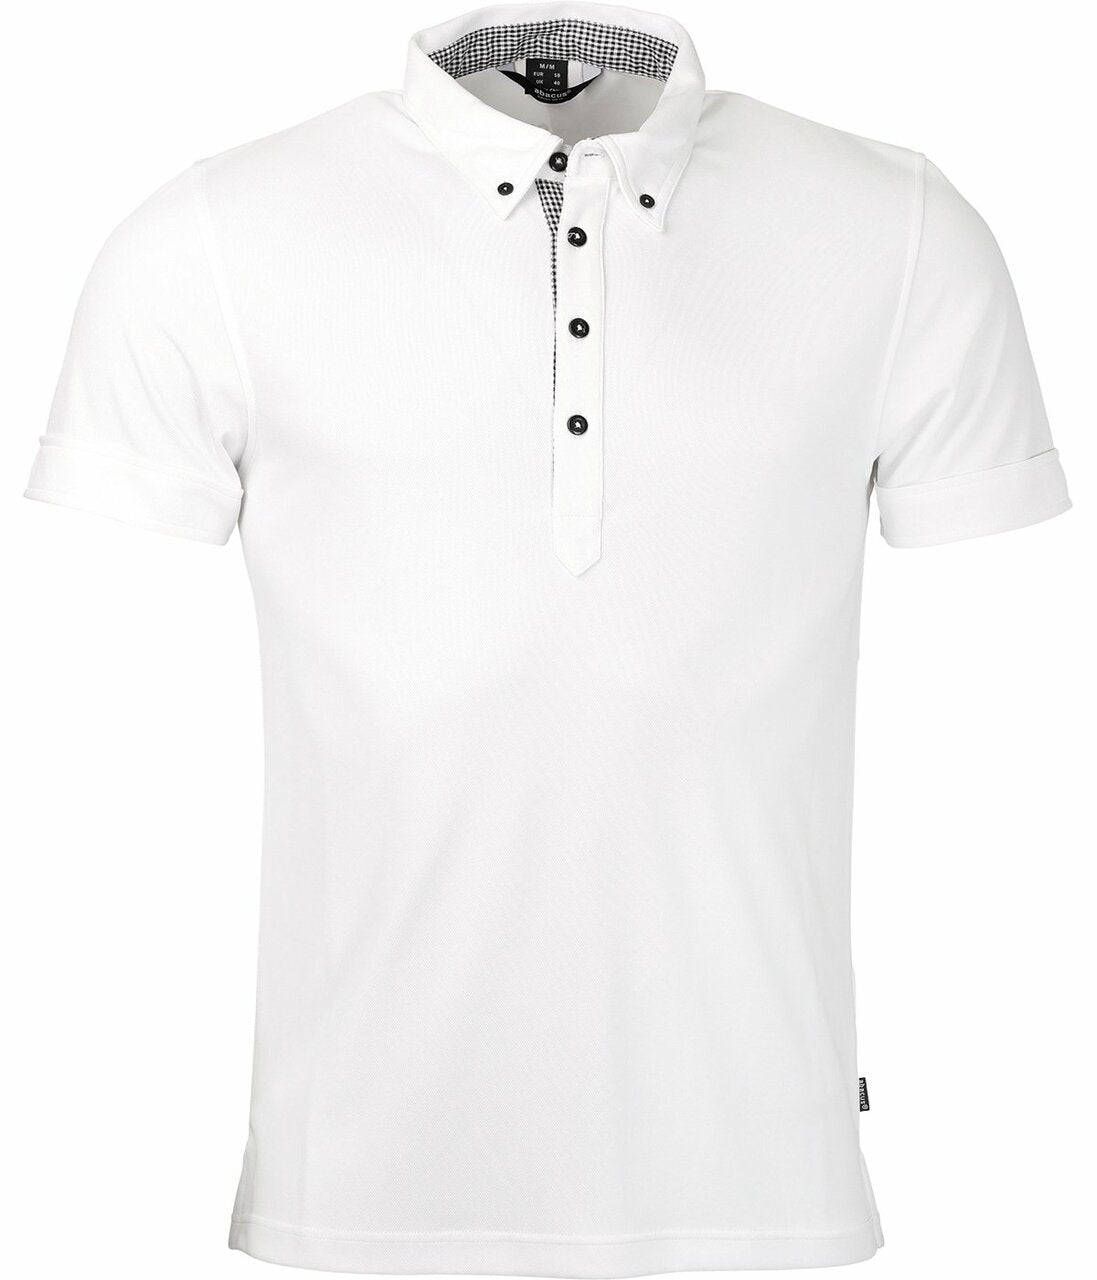 Abacus Sports Wear: Men’s High-Performance Golf Polo – Oliver